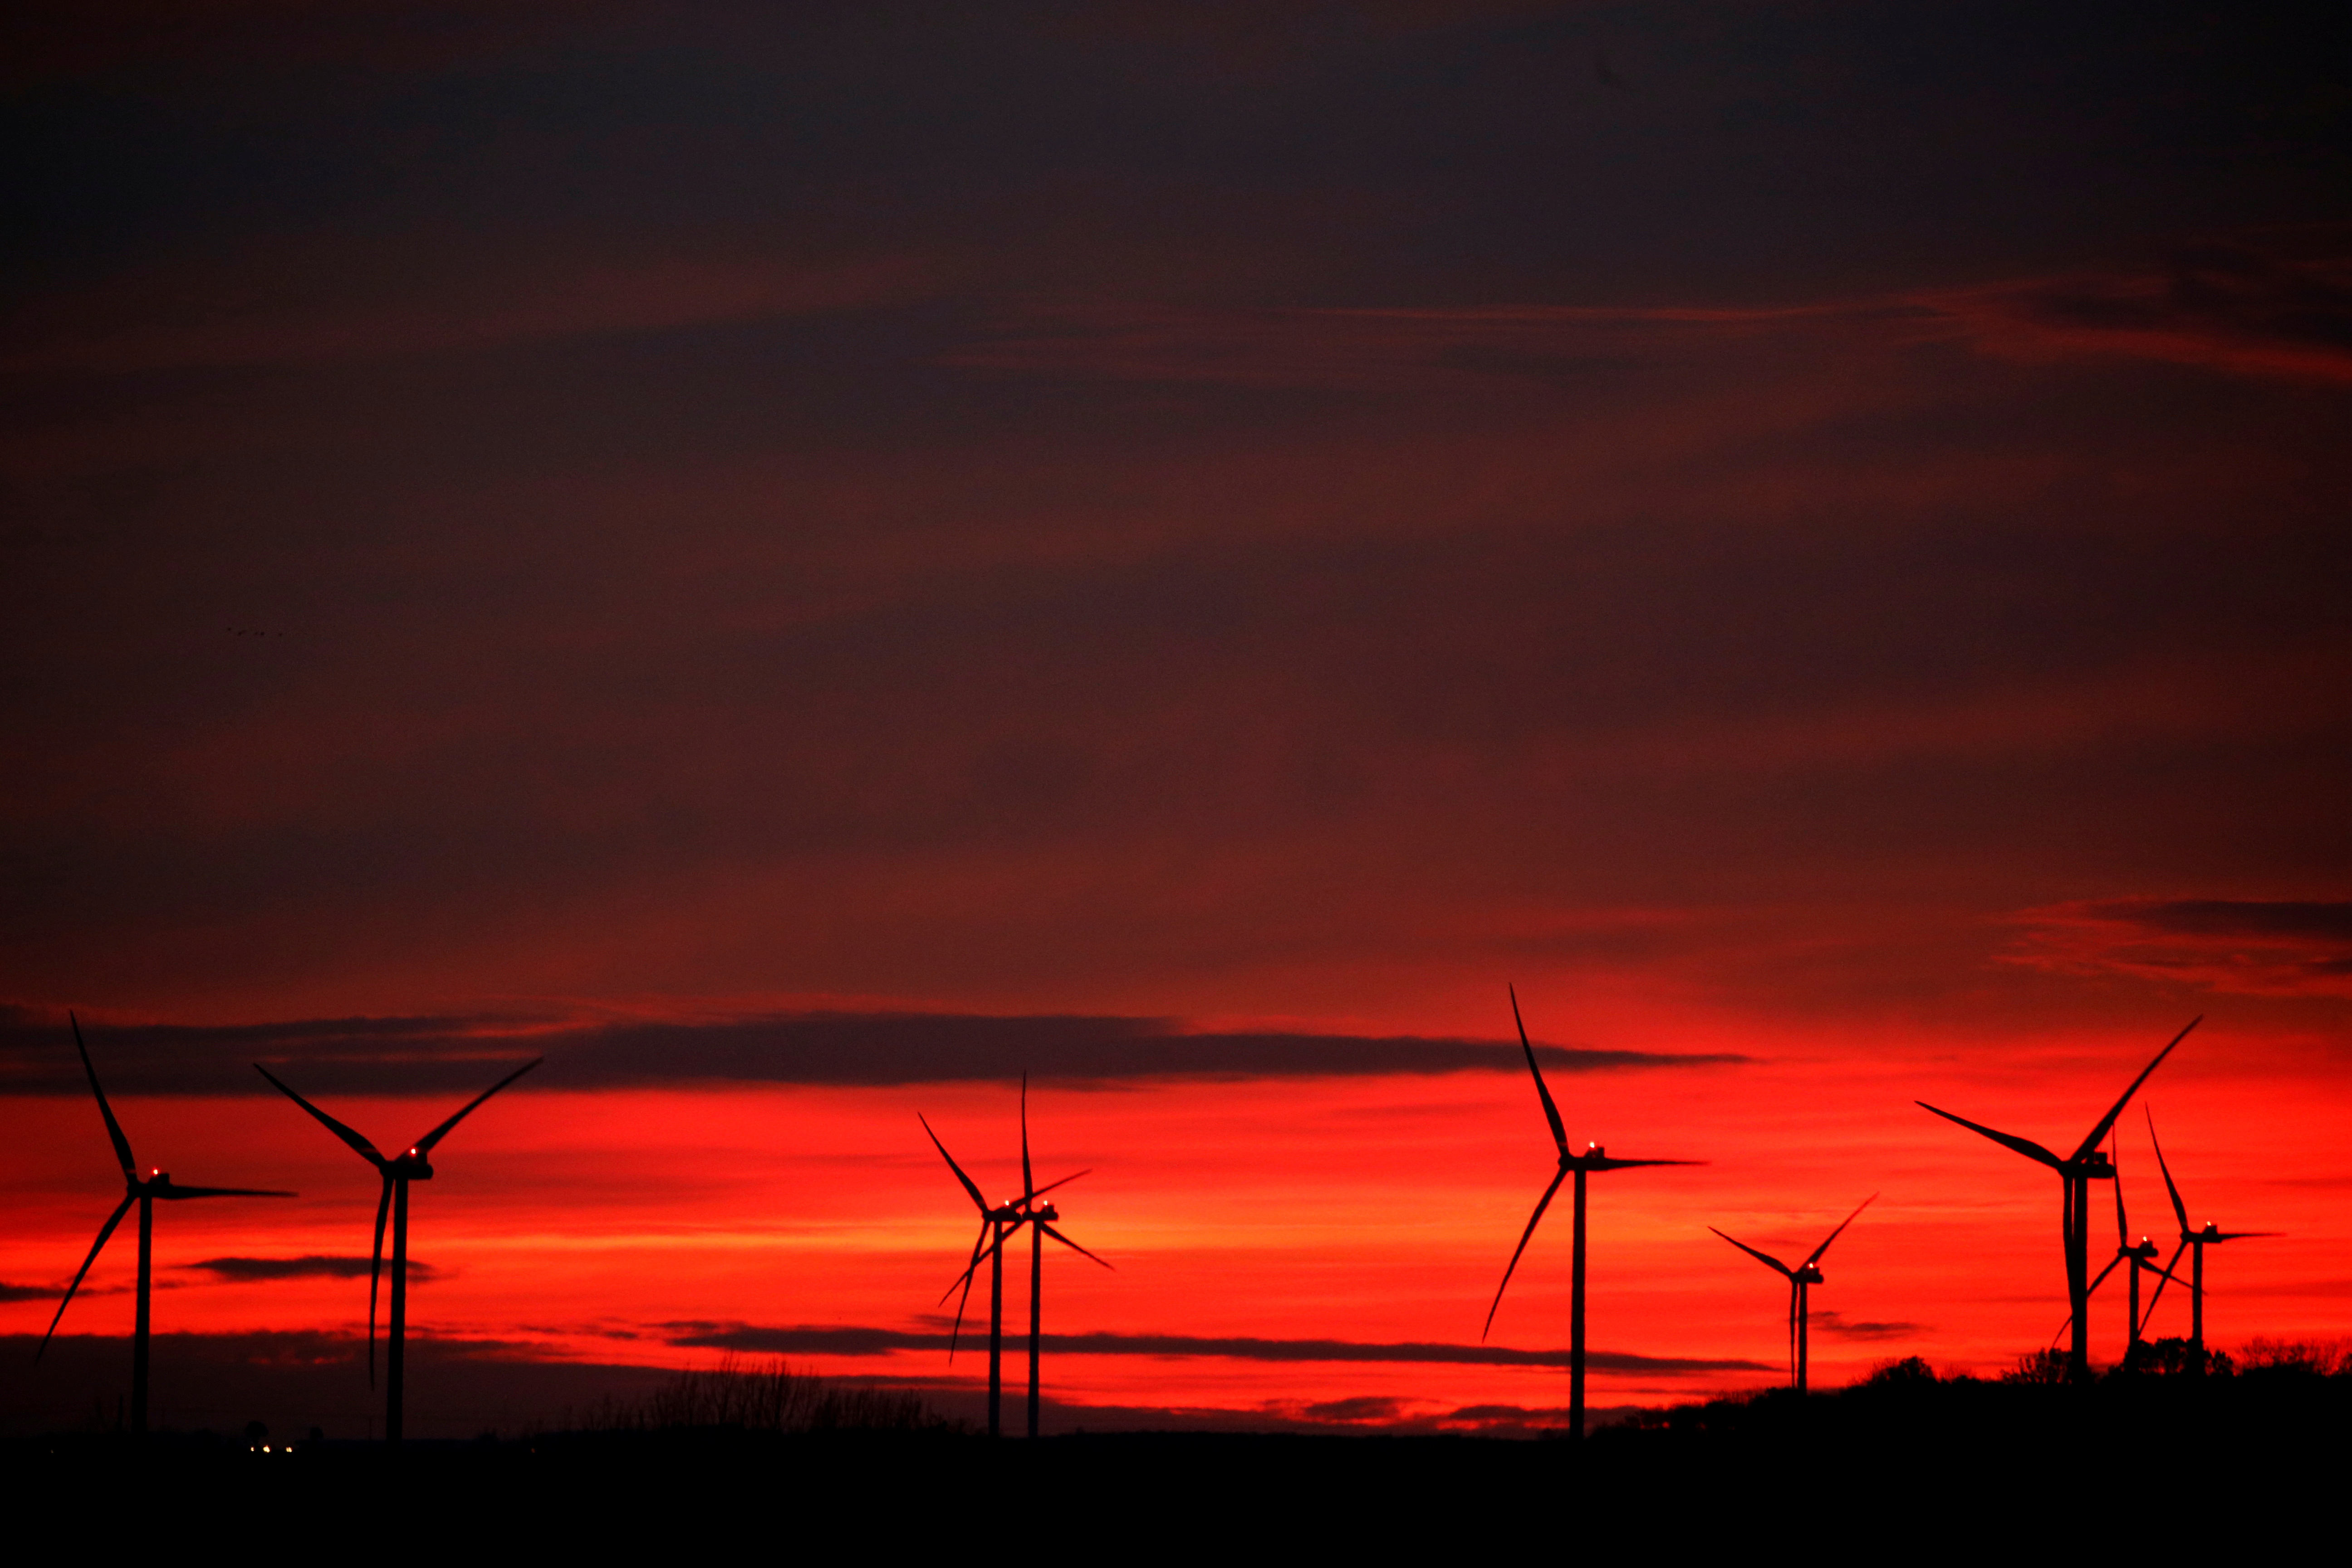 Power-generating windmill turbines are pictured at sunset at a wind park in Moeuvres near Cambrai, France, November 12, 2018. REUTERS/Pascal Rossignol